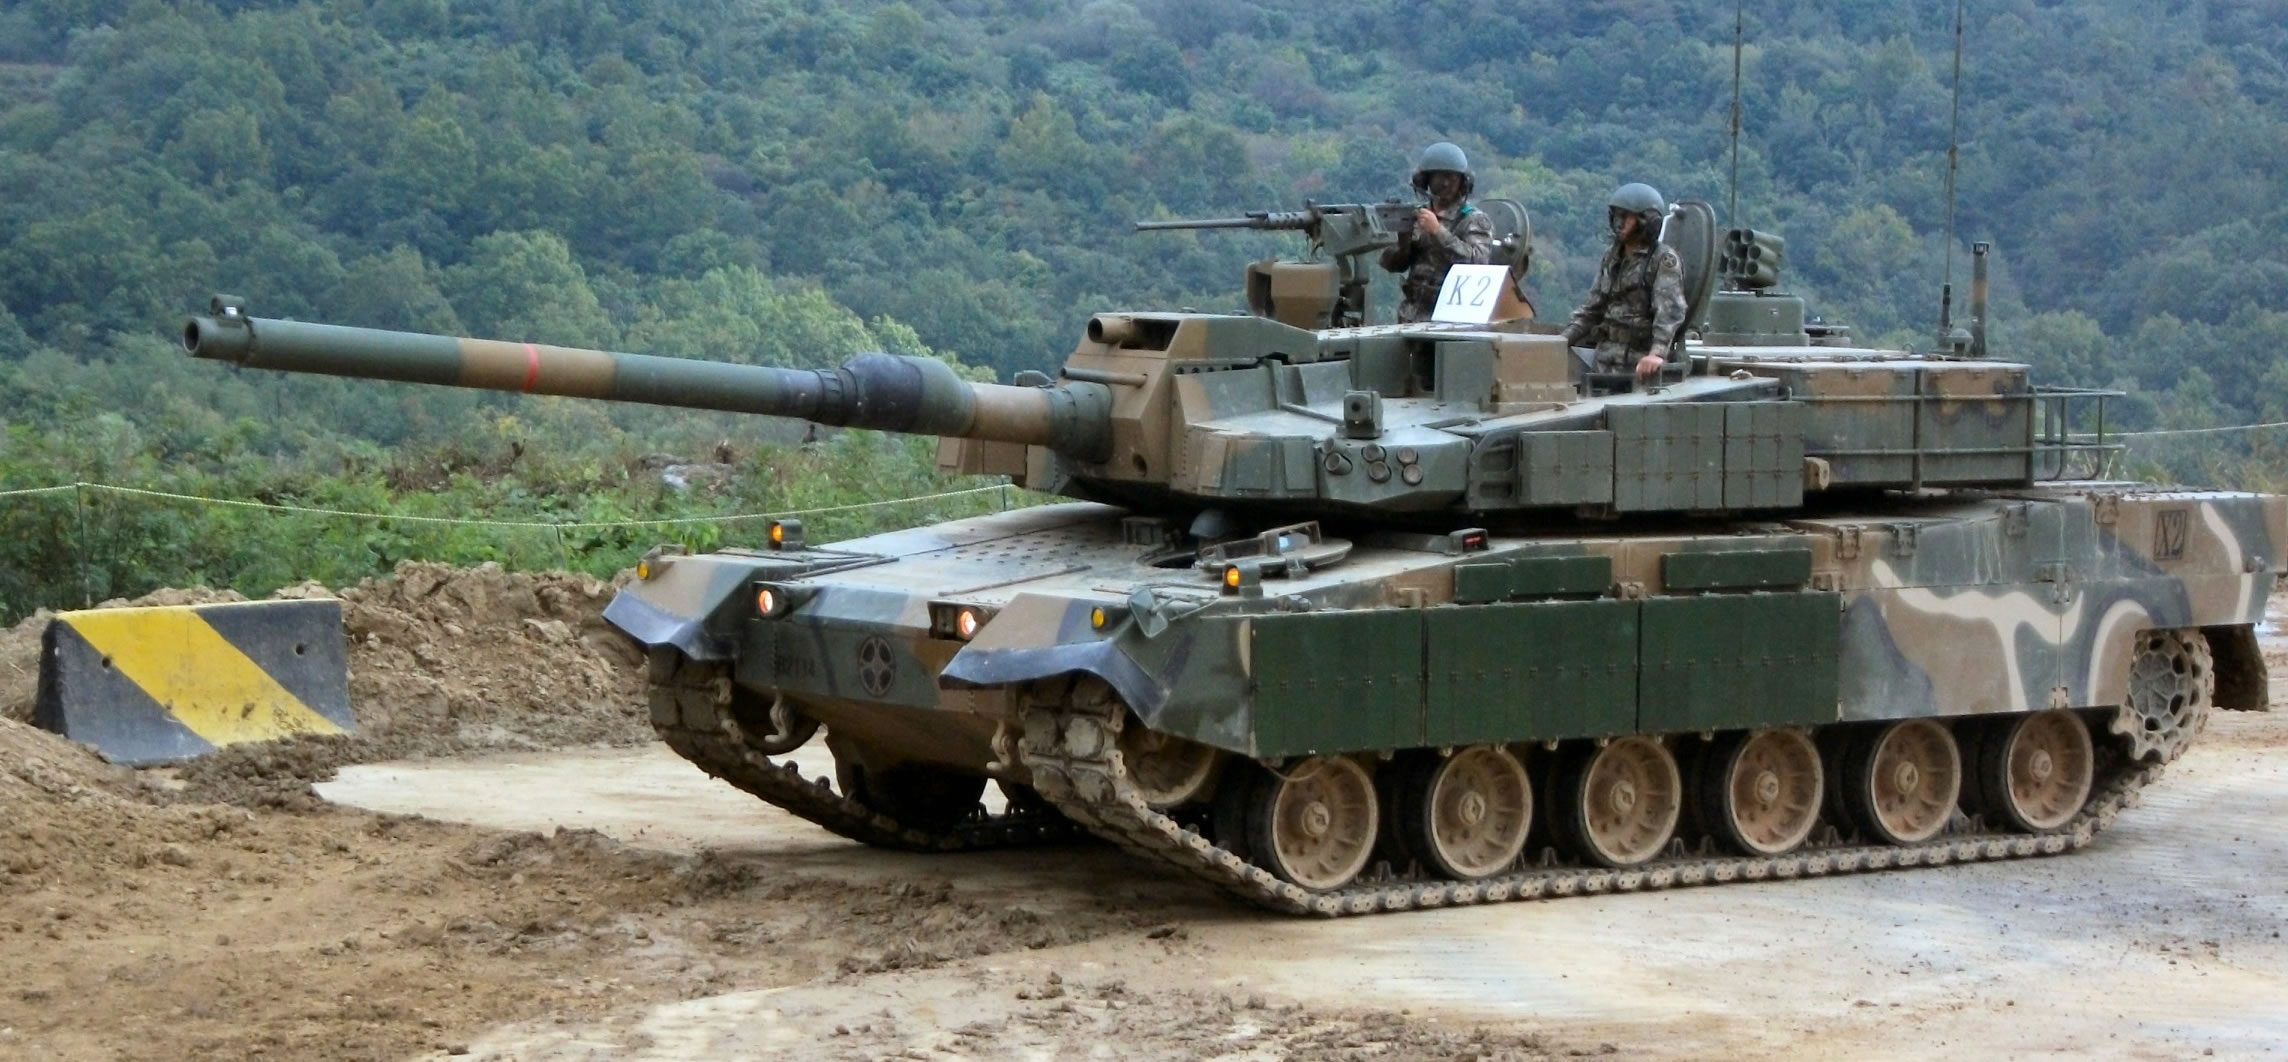 Poland Signs Contracts to Purchase K2 Black Panther Tanks and K9 Thunder  Self-Propelled Howitzers for $5.8 Billion